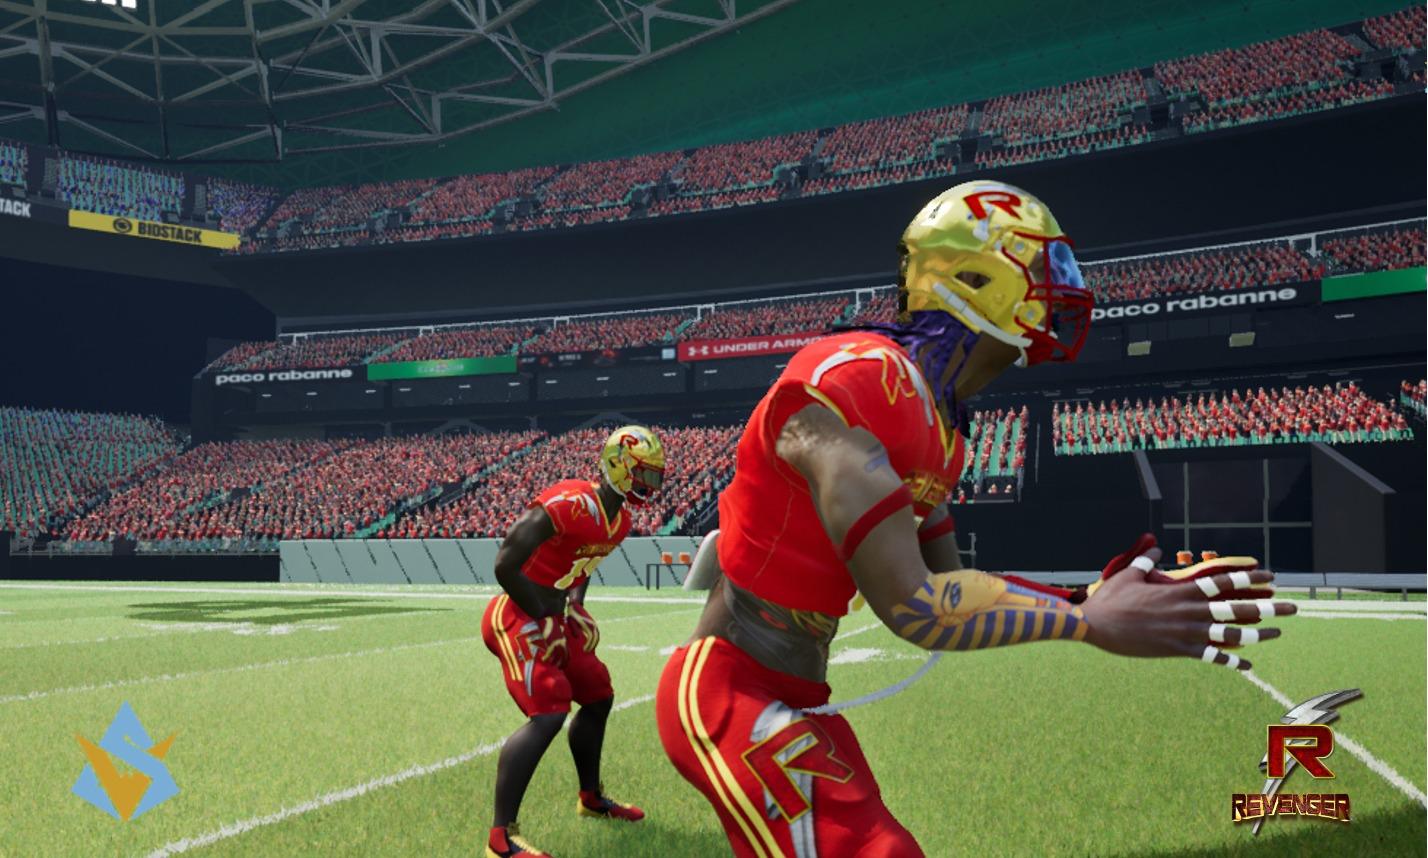 PRESEASON PREVIEW: Beverly Hills Revengers IN THE SIMWIN SPORTS FOOTBALL LEAGUE